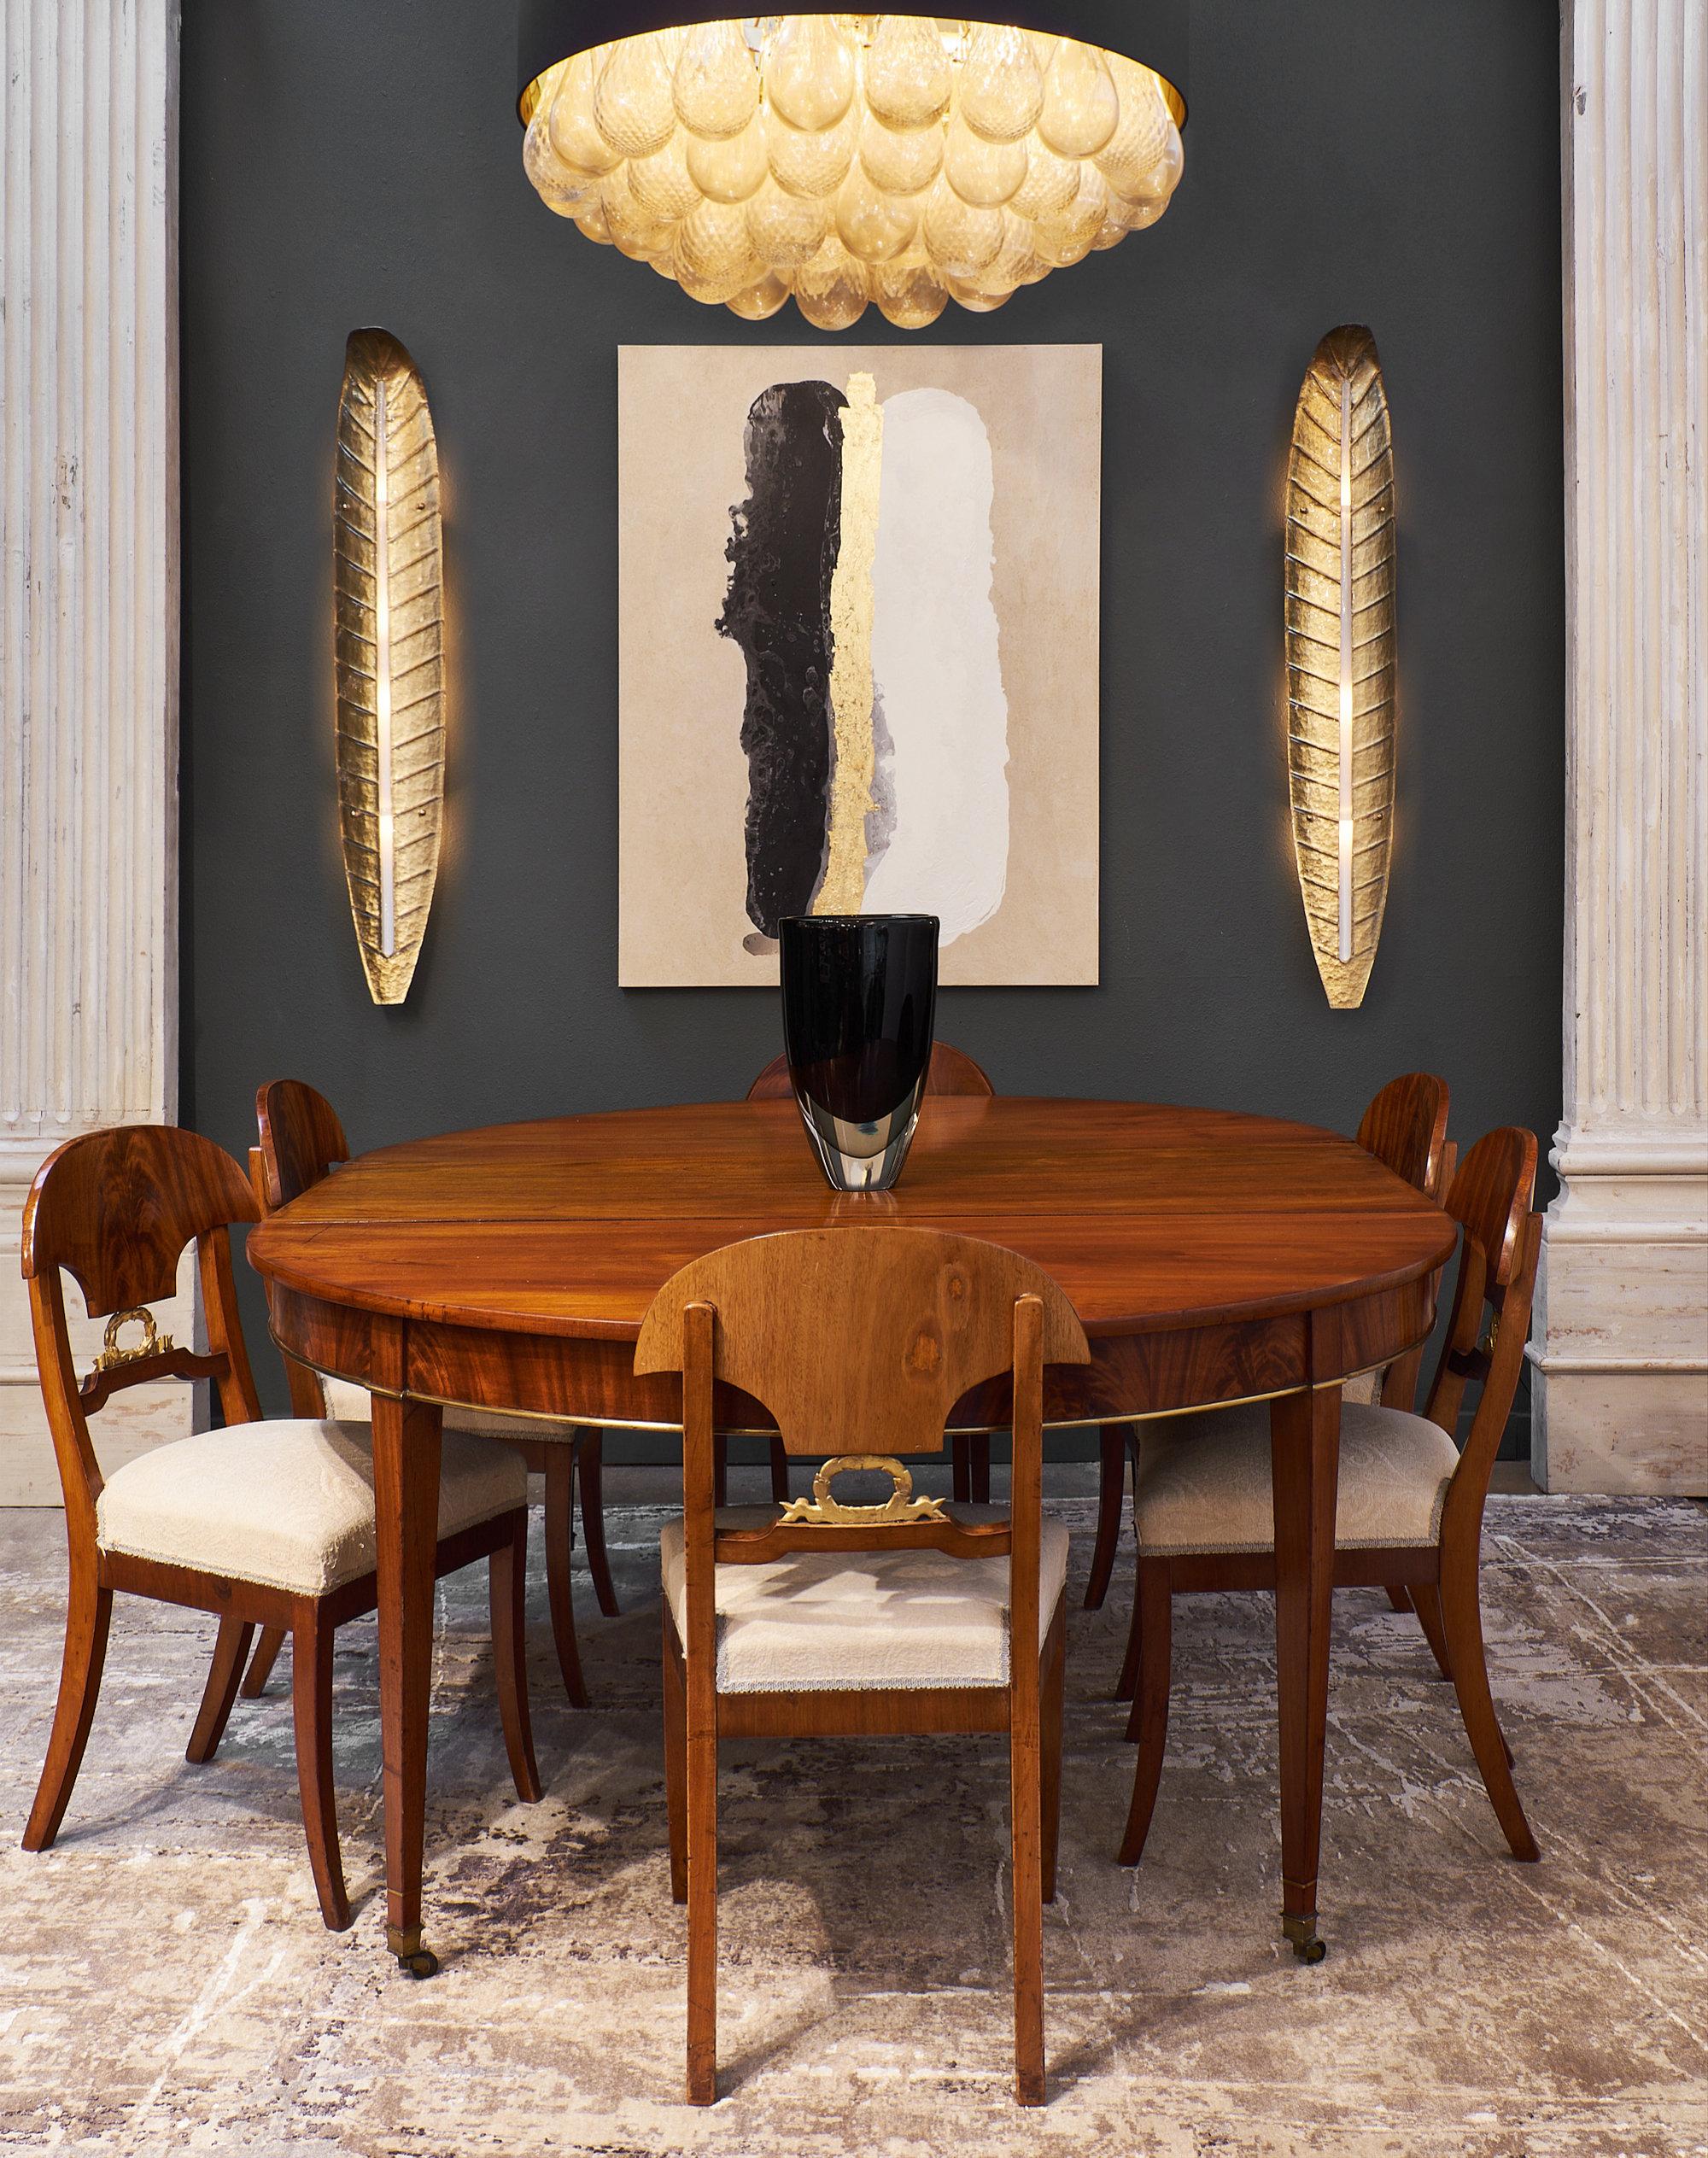 A dining room set of Karl Johan featuring six chairs and two armchairs in Cuban flamed mahogany with shovel-shaped backrests, 23-carat gold leafed laurel and acanthus leafs details, upholstered seats, and saber legs. The armchairs have recessed